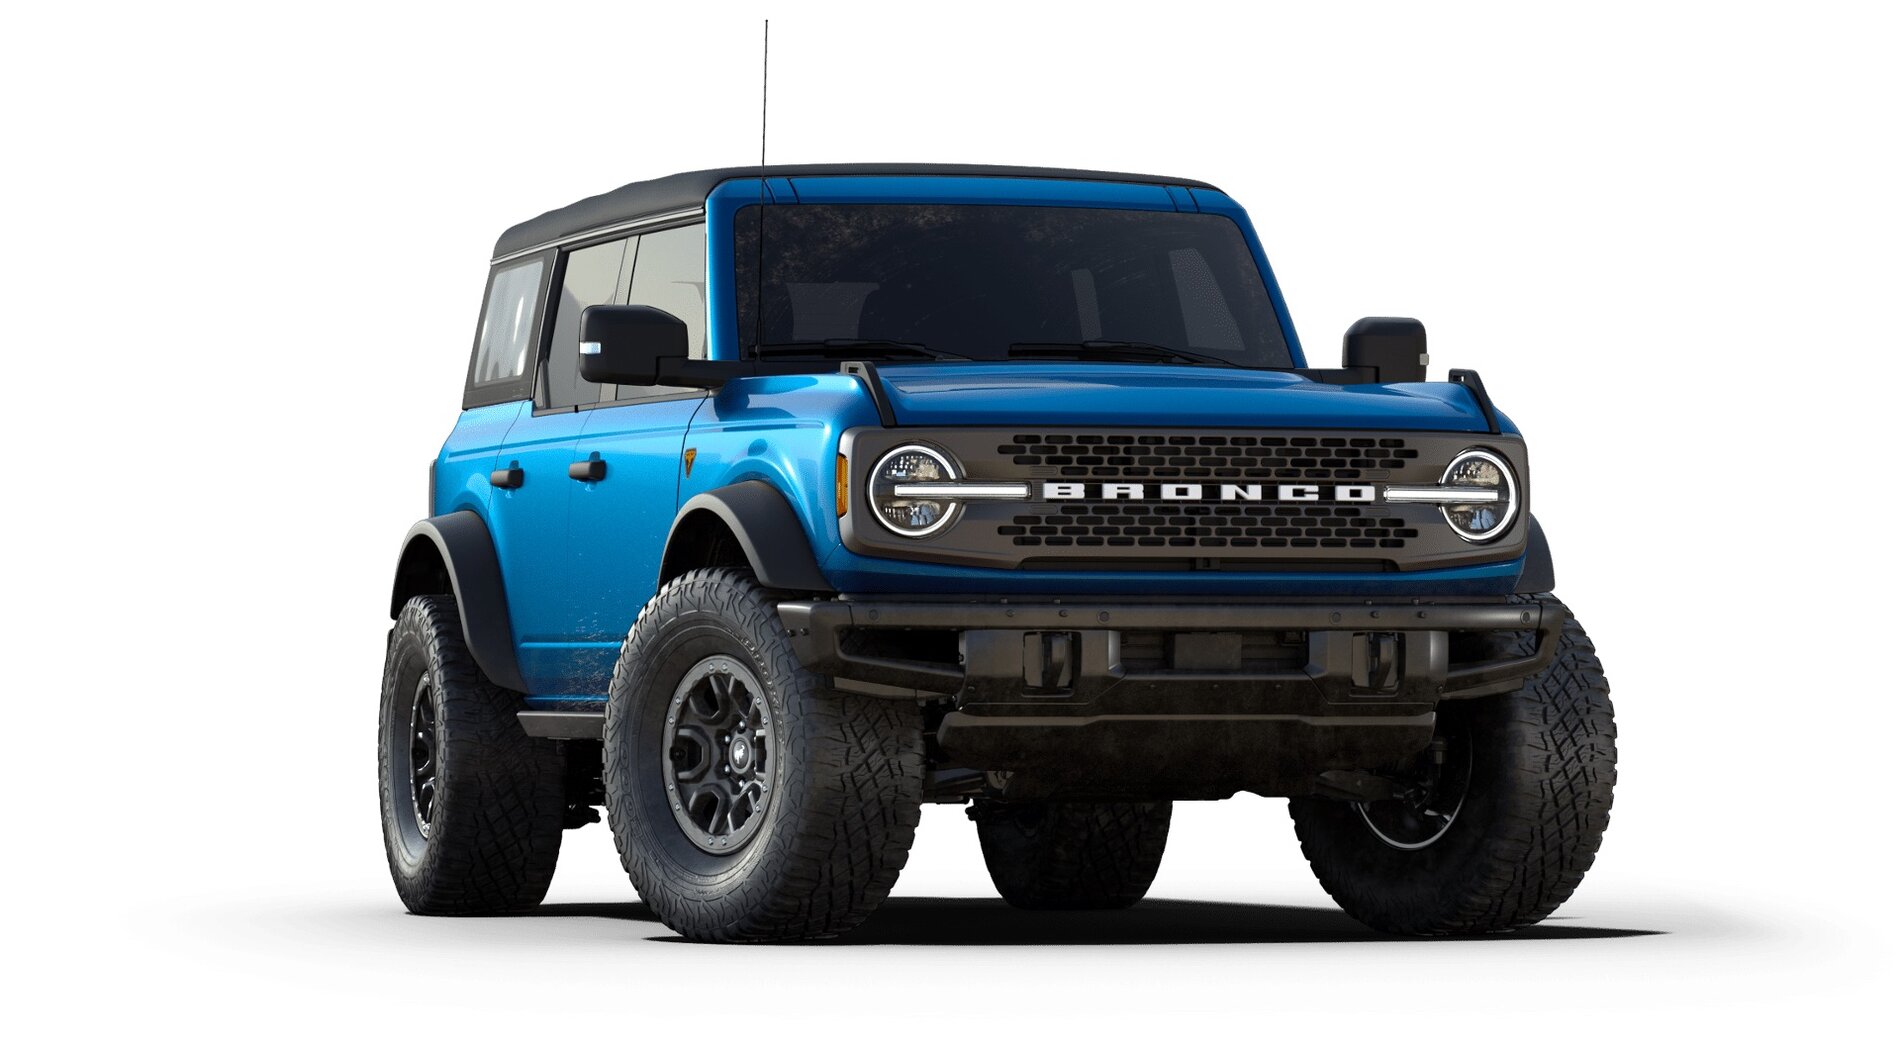 Ford Bronco Rockdawg84's Badsquach 21 Adventure and Build Thread "Wild Blue" IMG_0248